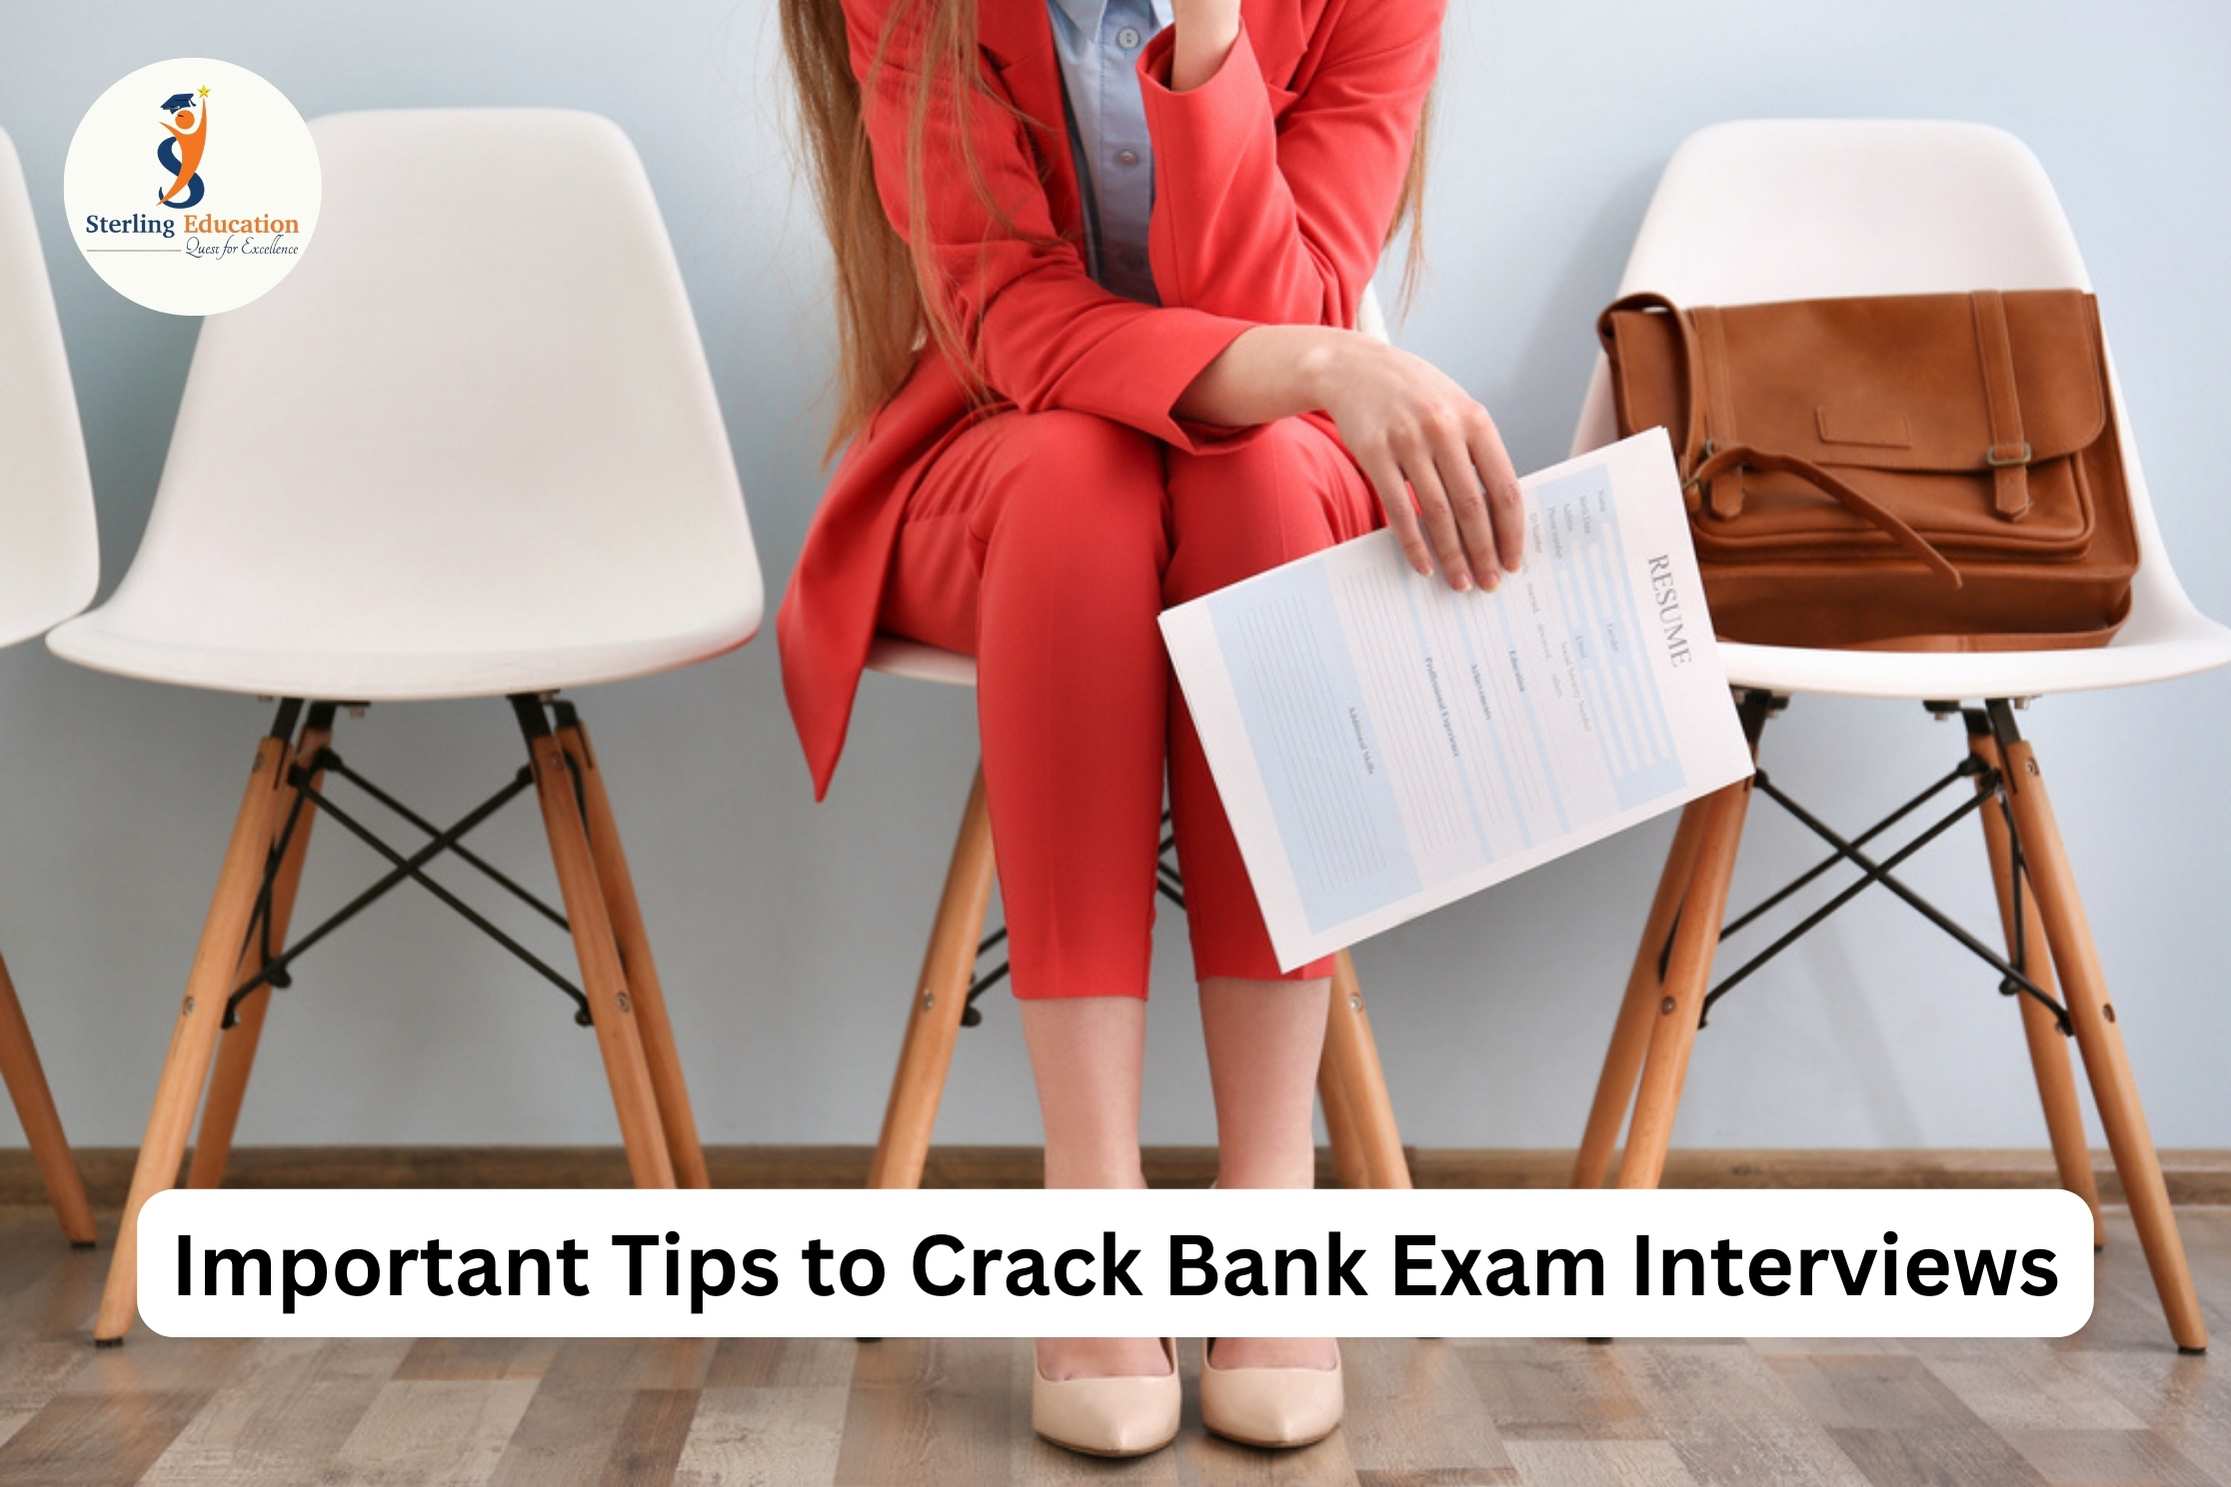 Important Tips to Crack Bank Exam Interviews